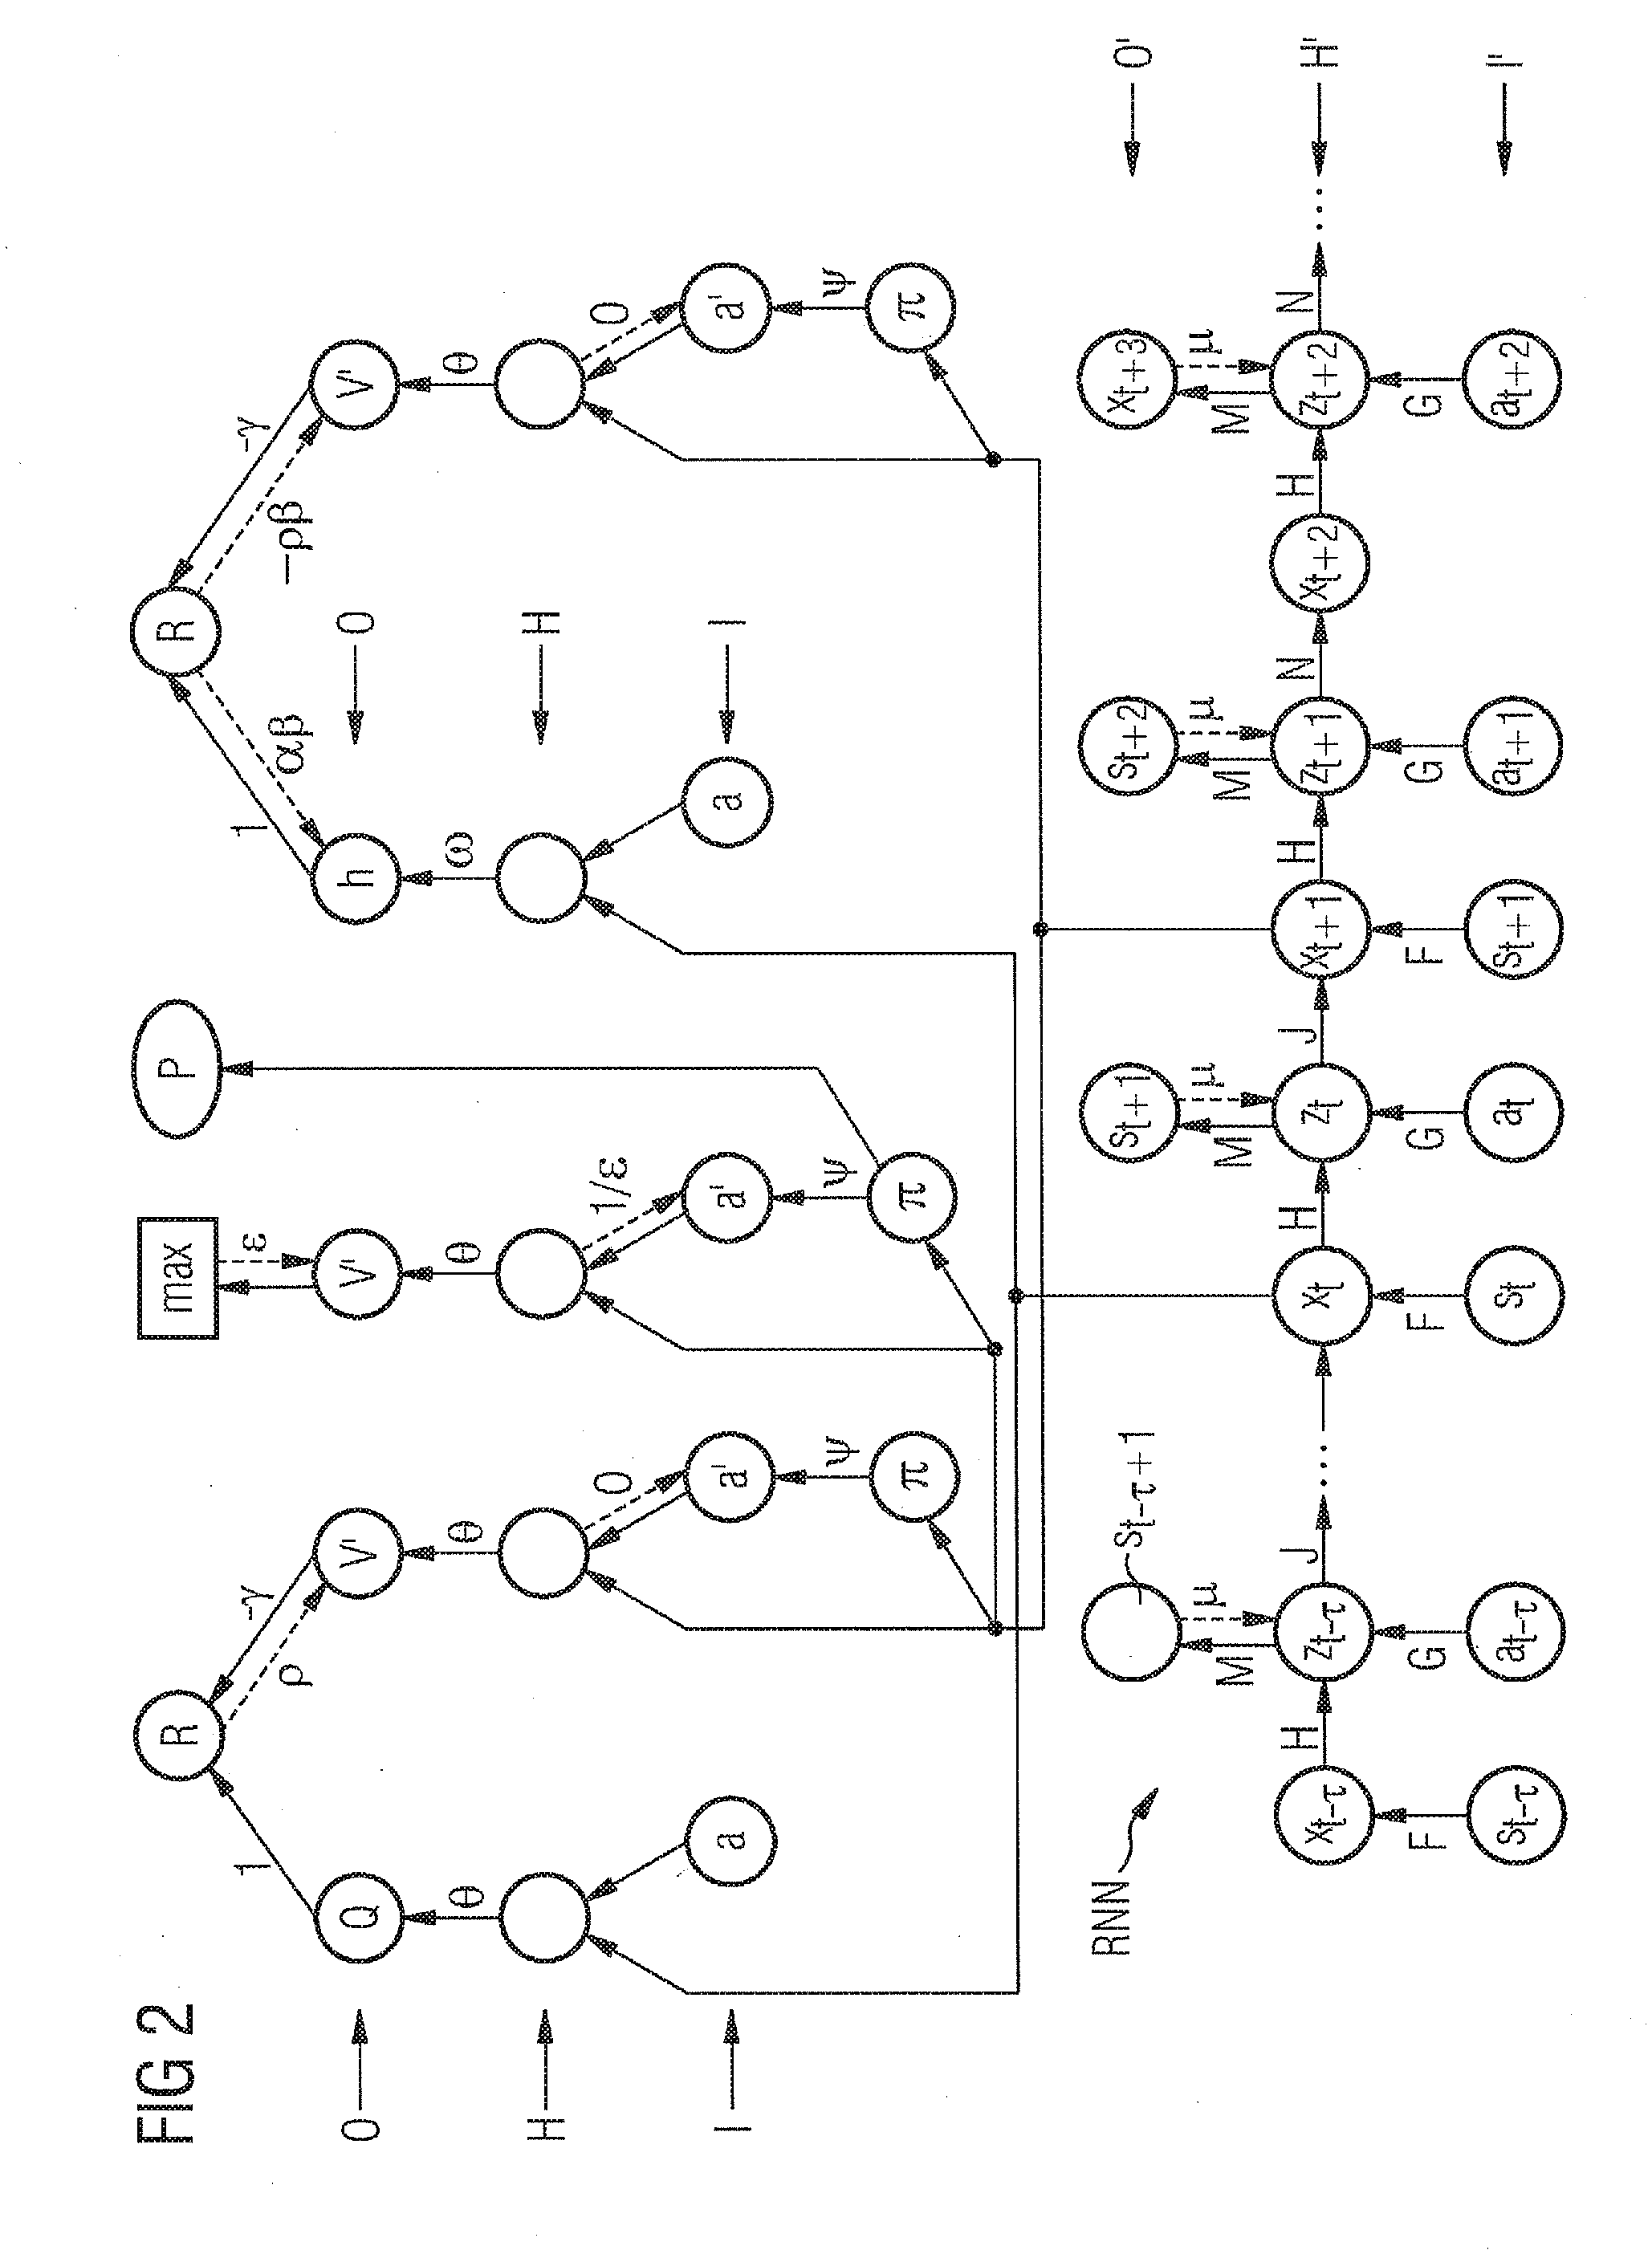 Method for computer-aided control and/or regulation using neural networks